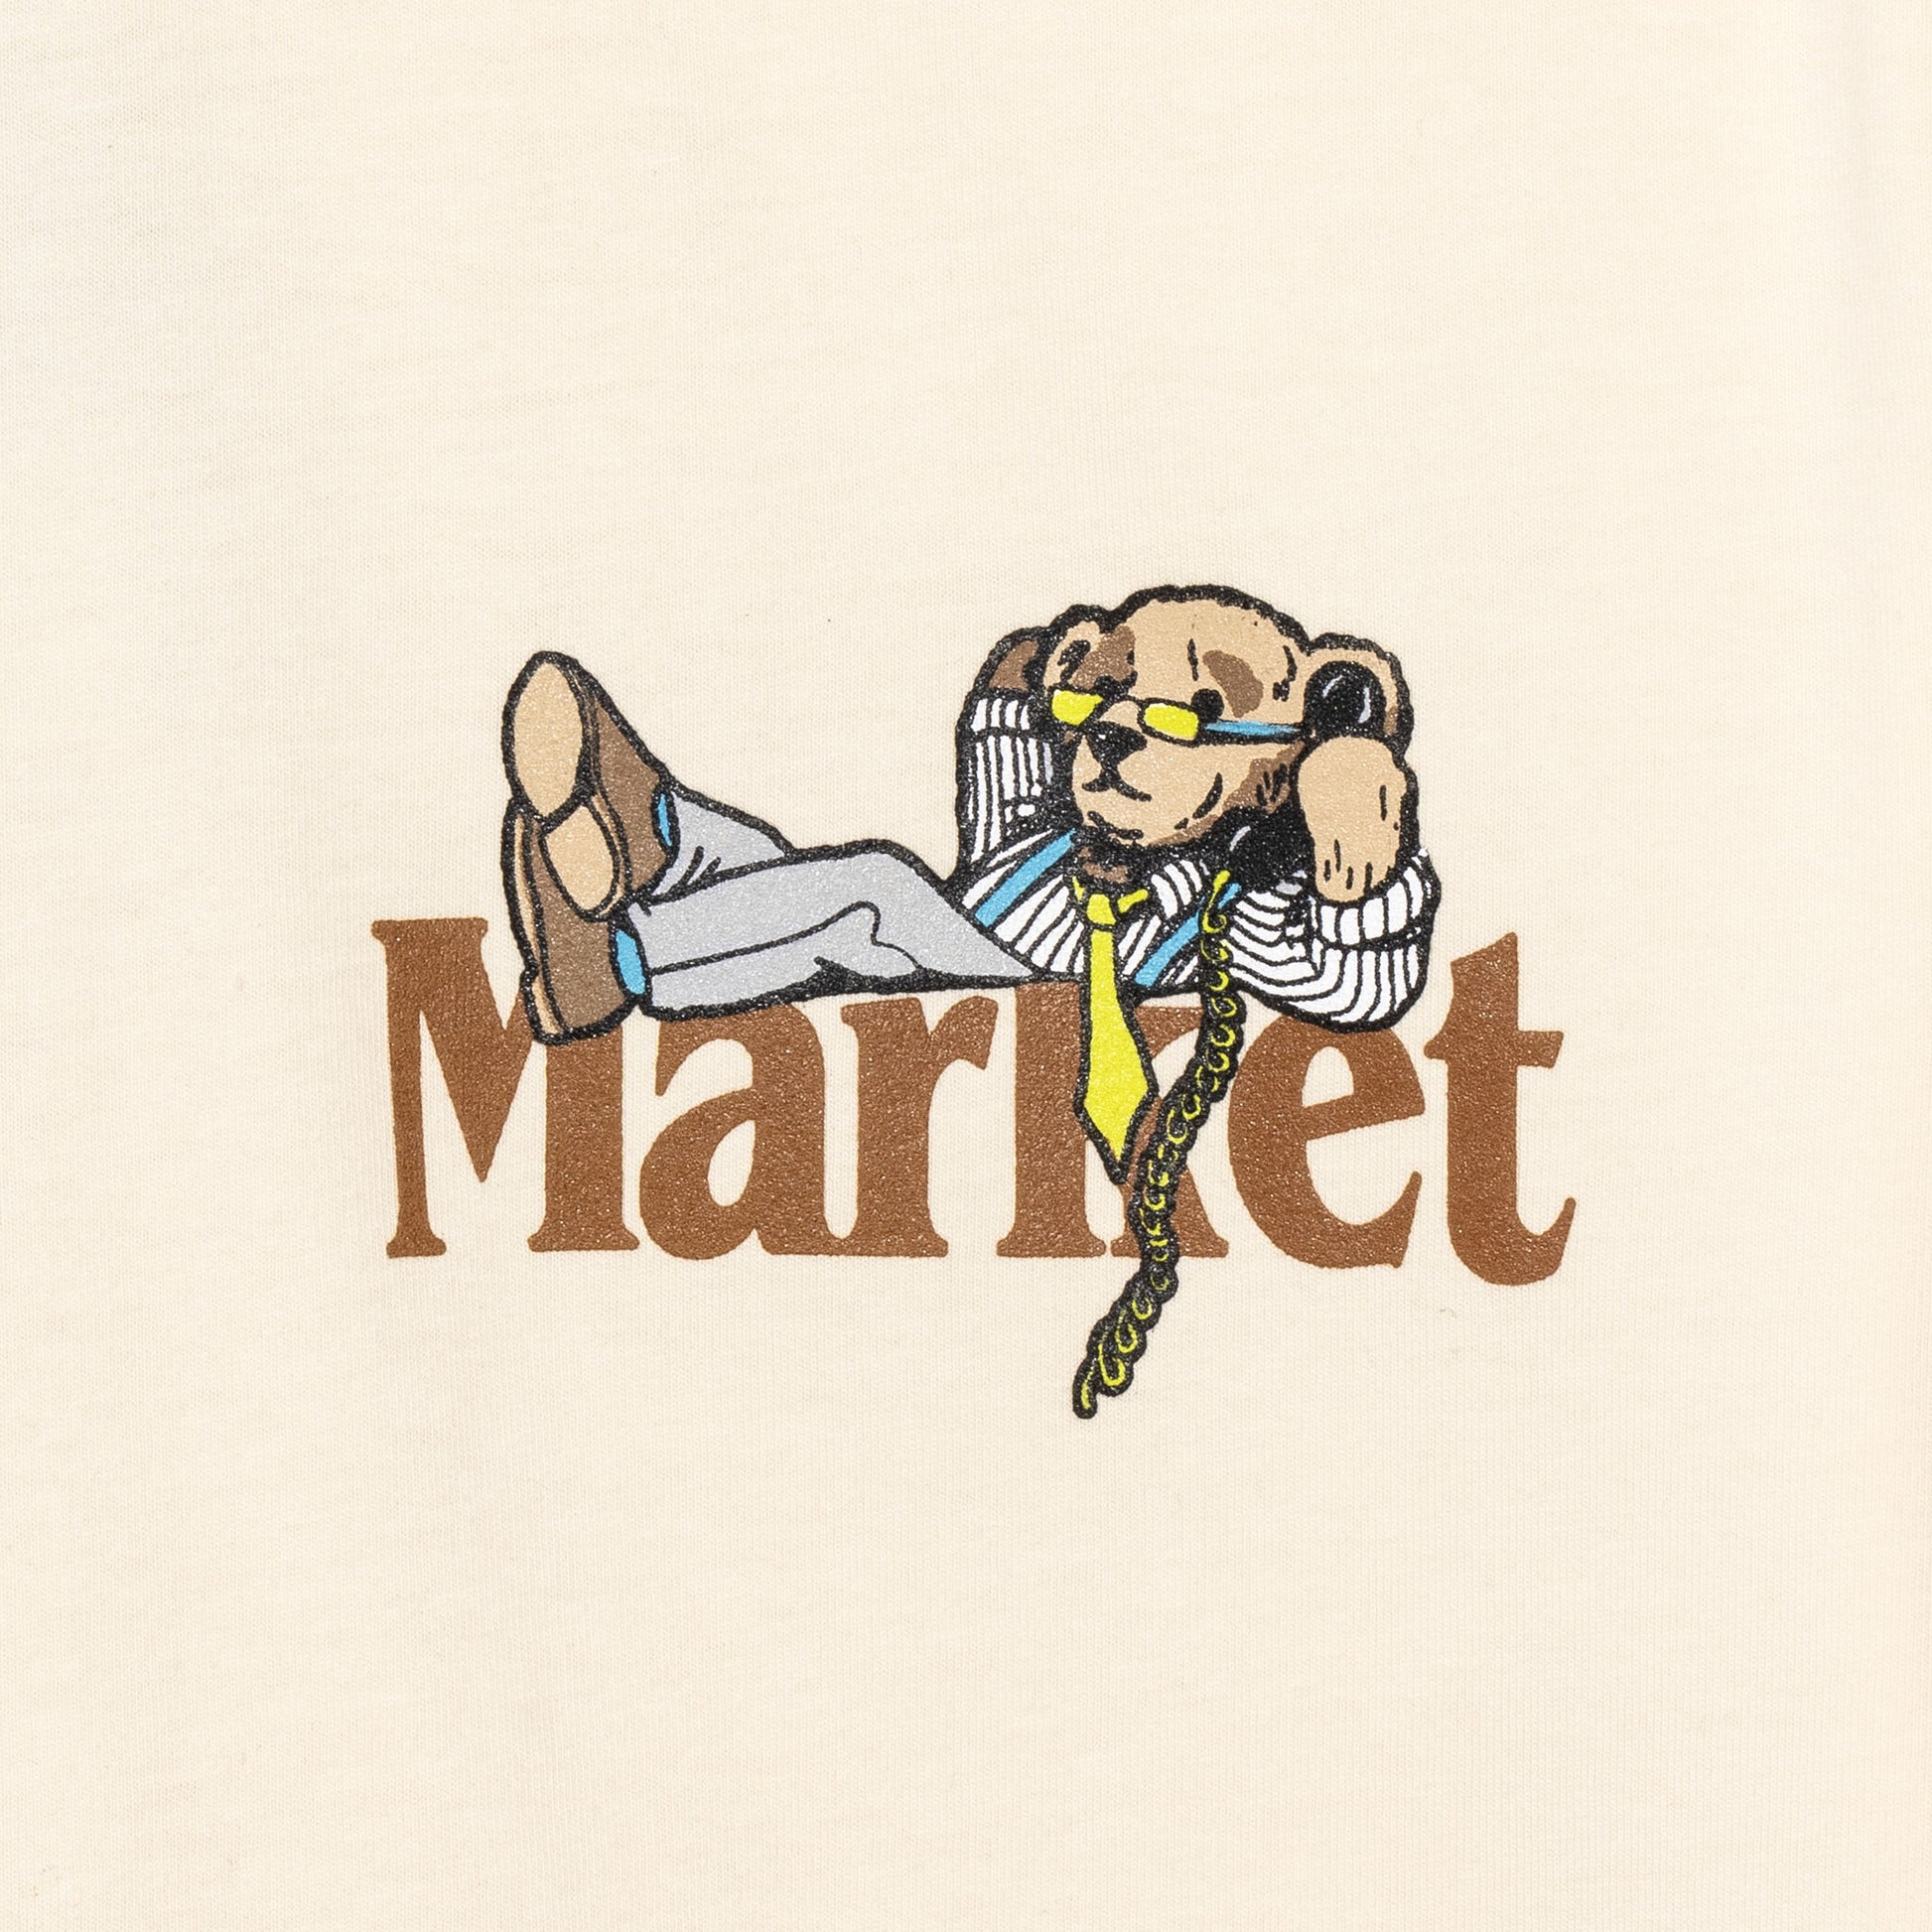 MARKET clothing brand BETTER CALL BEAR T-SHIRT. Find more graphic tees, hats, hoodies and more at MarketStudios.com. Formally Chinatown Market.